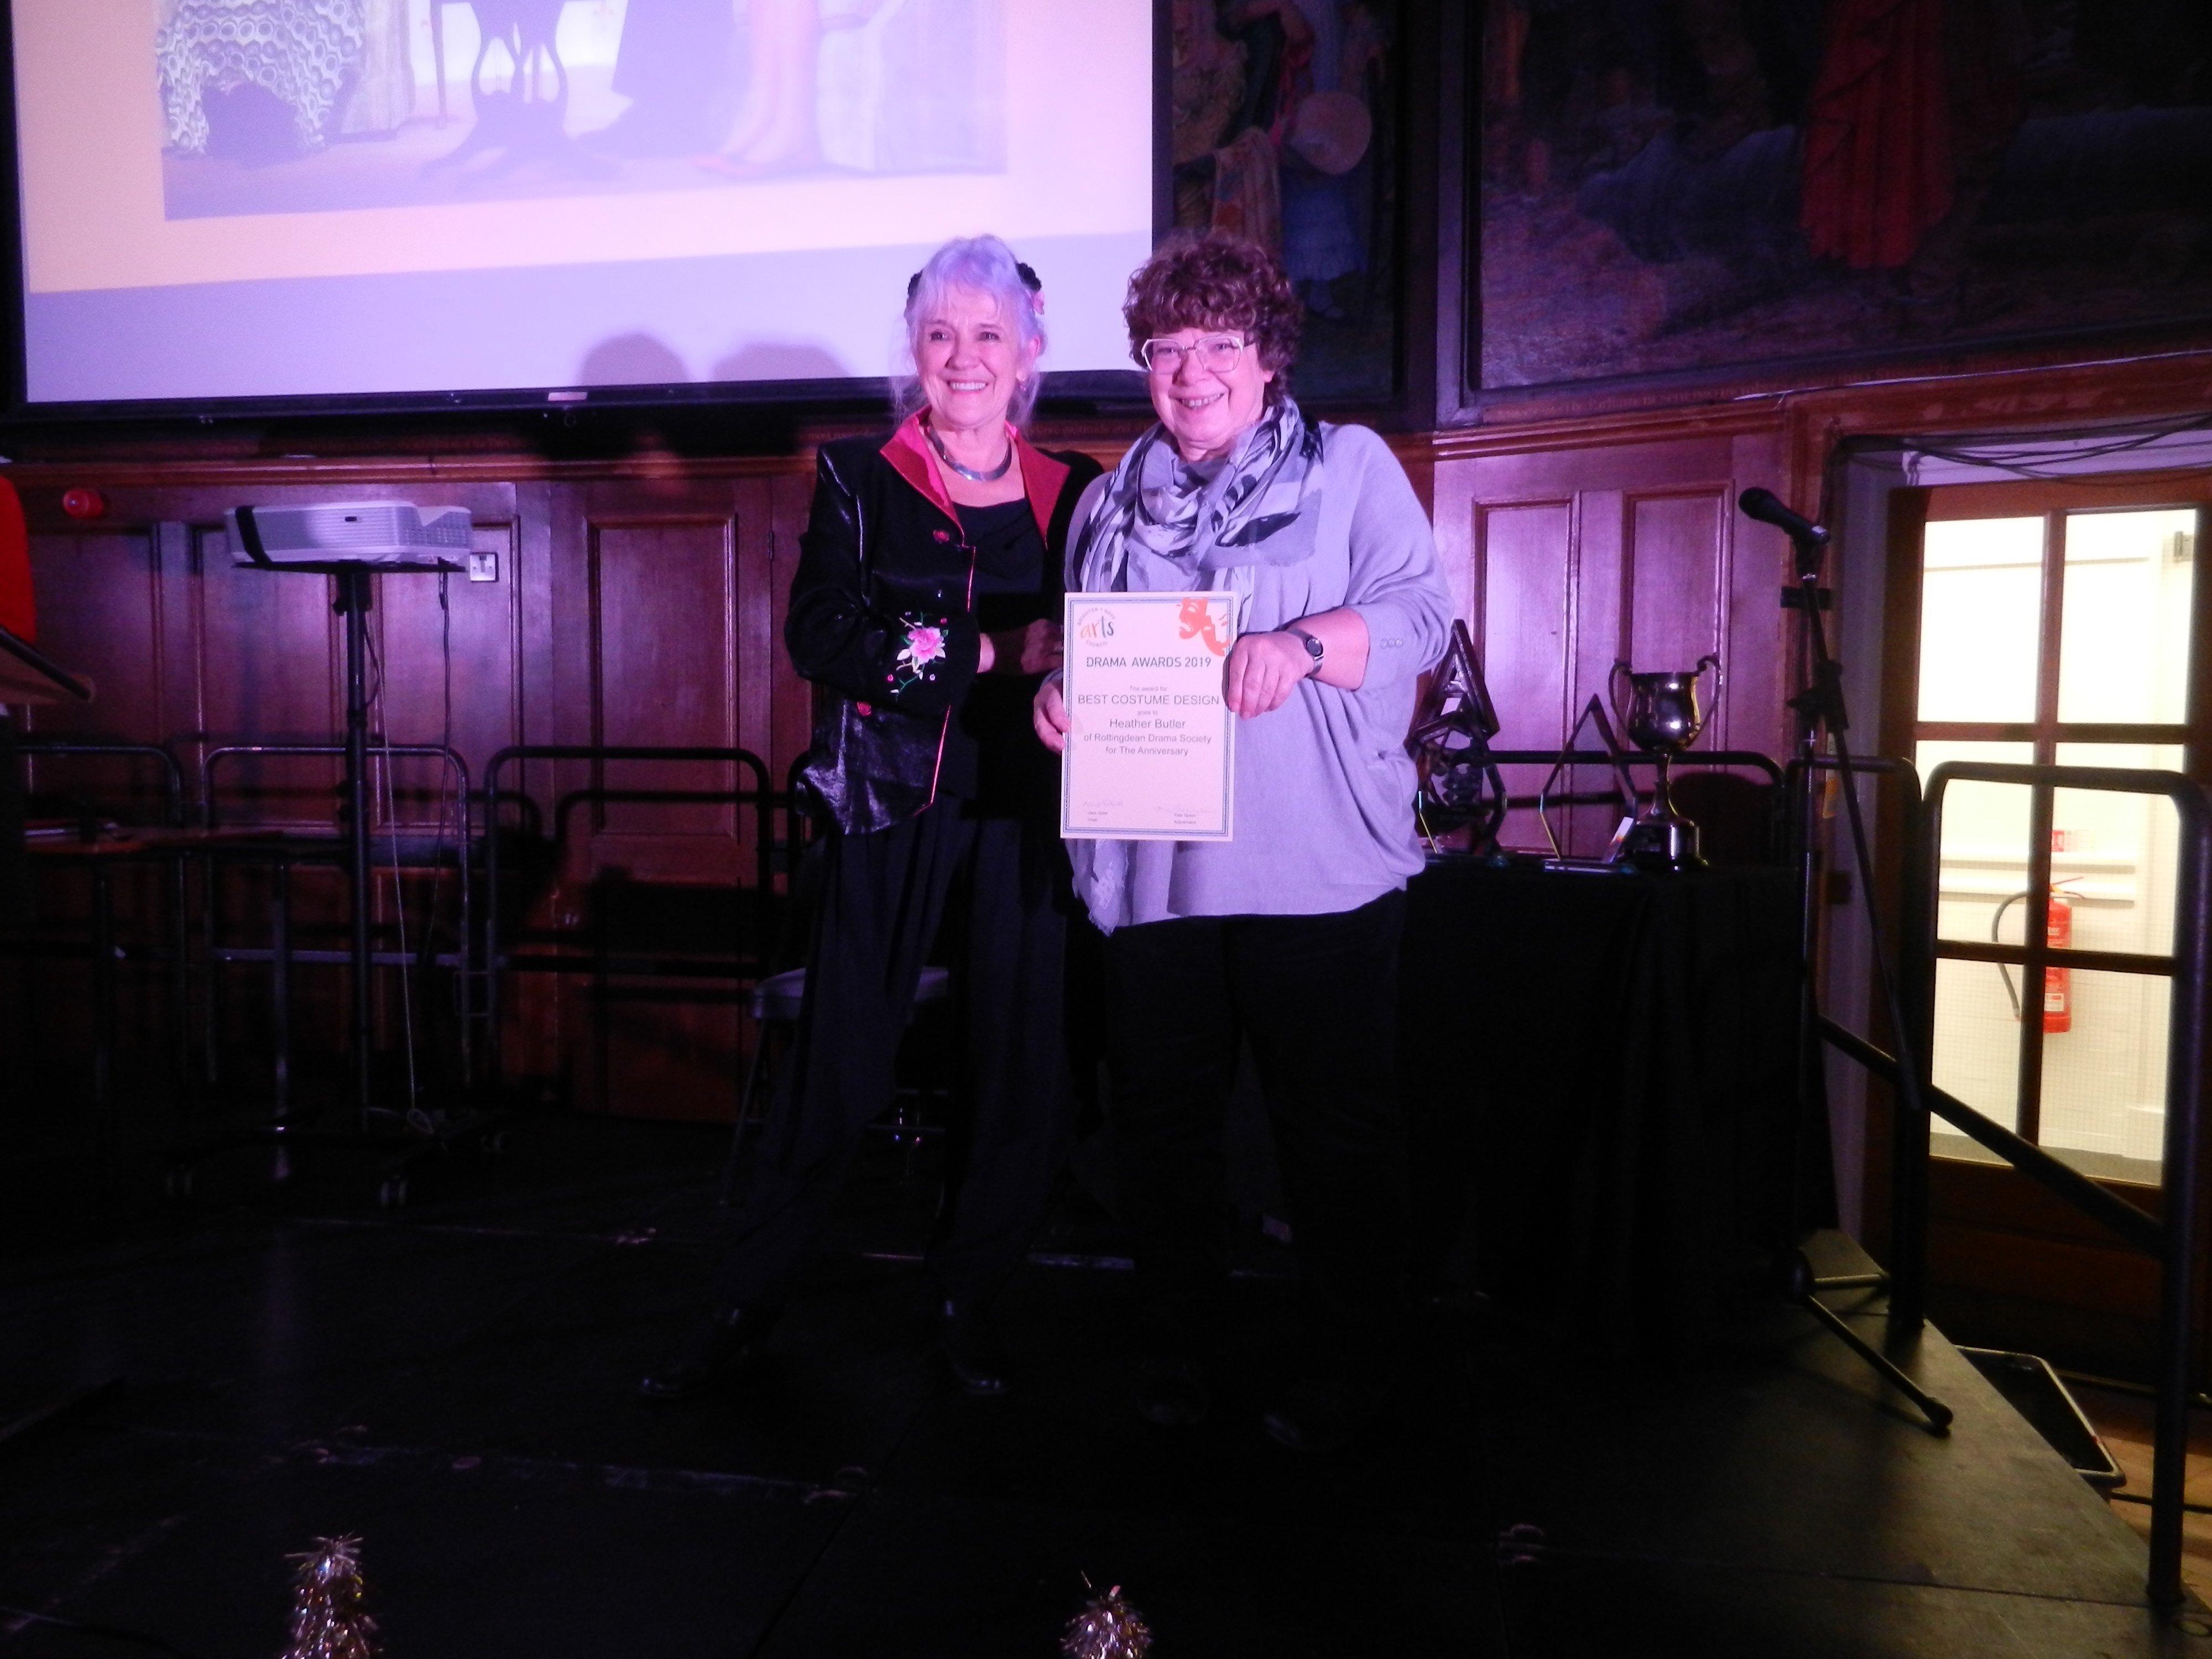 Heather Butler won best costume design for Rottingdean Drama Society's play The Anniversary